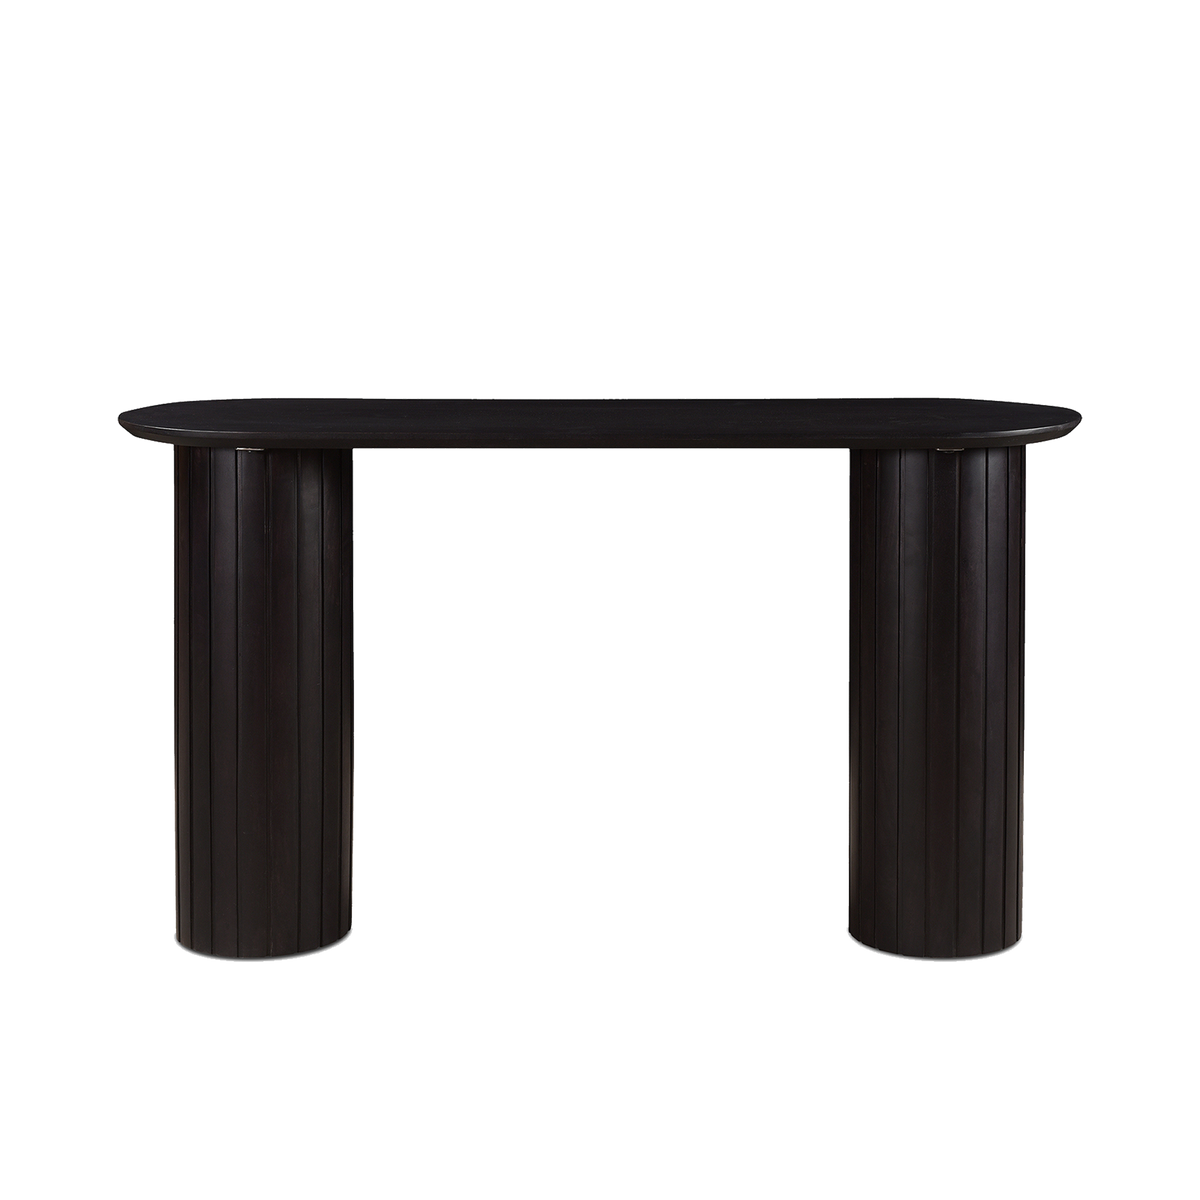 With its striking use of simple geometry and natural materials, the Payman Console Table effortlessly combines style and substance.